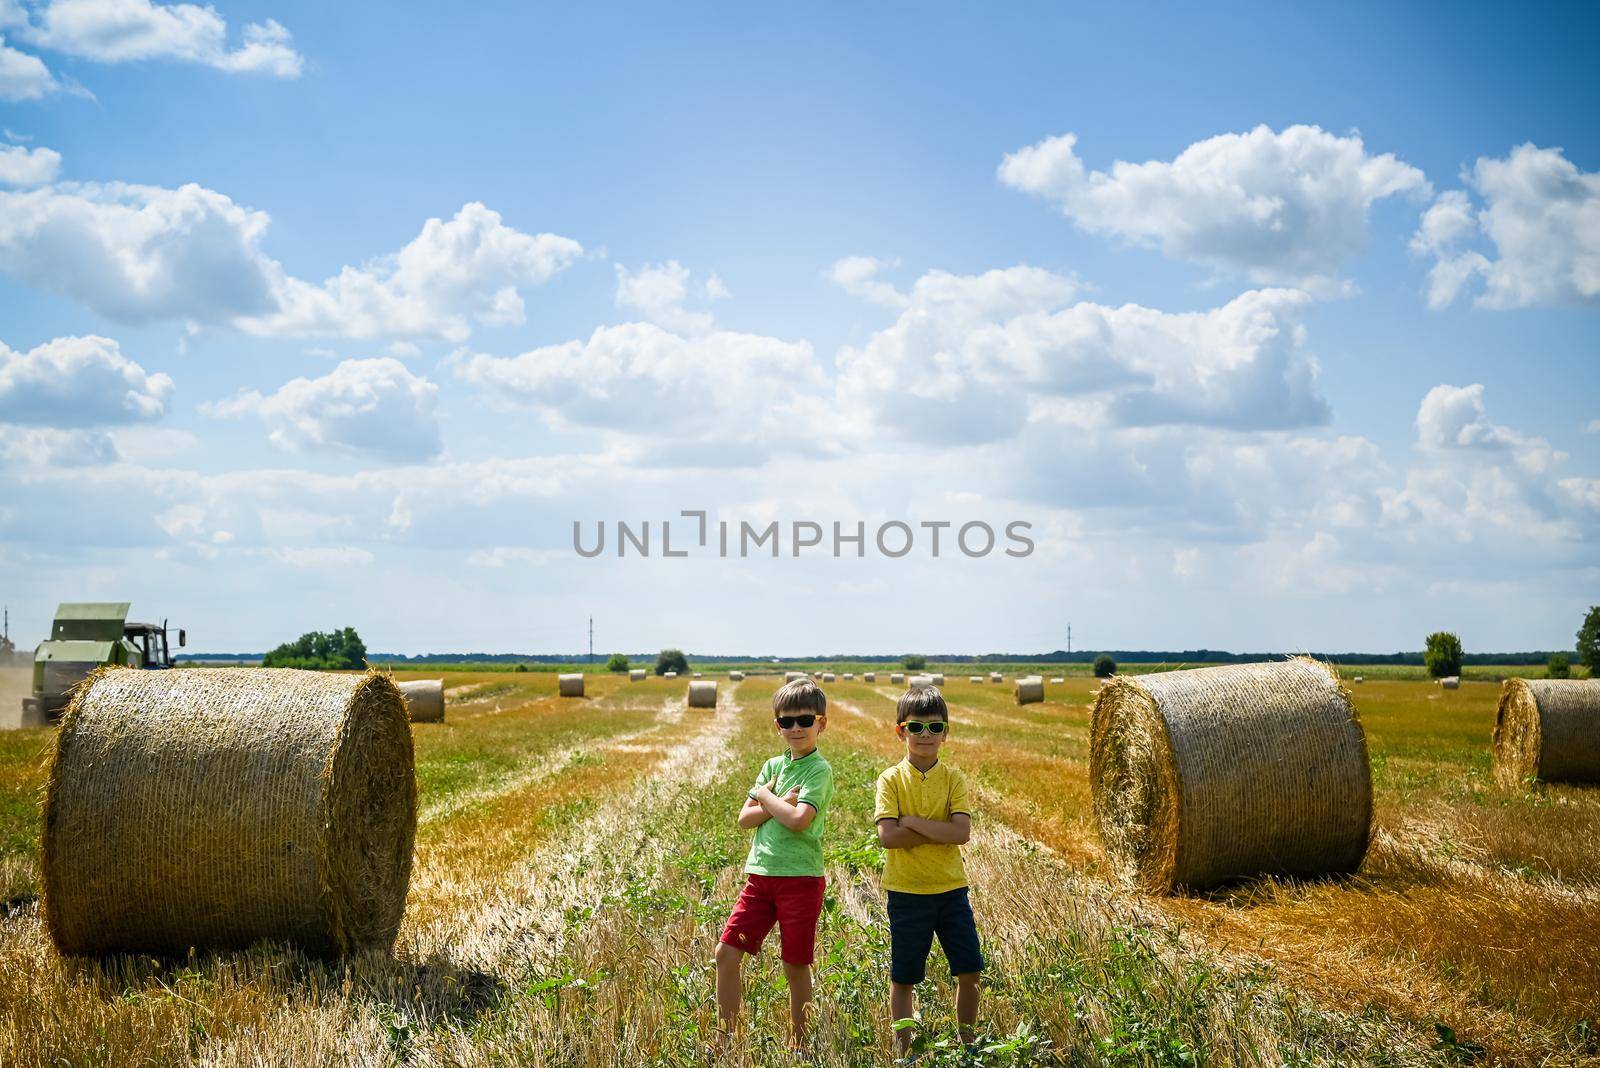 Two little boy stand among round haystack. Field with round bales after harvest under blue sky. Big round bales of straw, sheaves, haystacks.